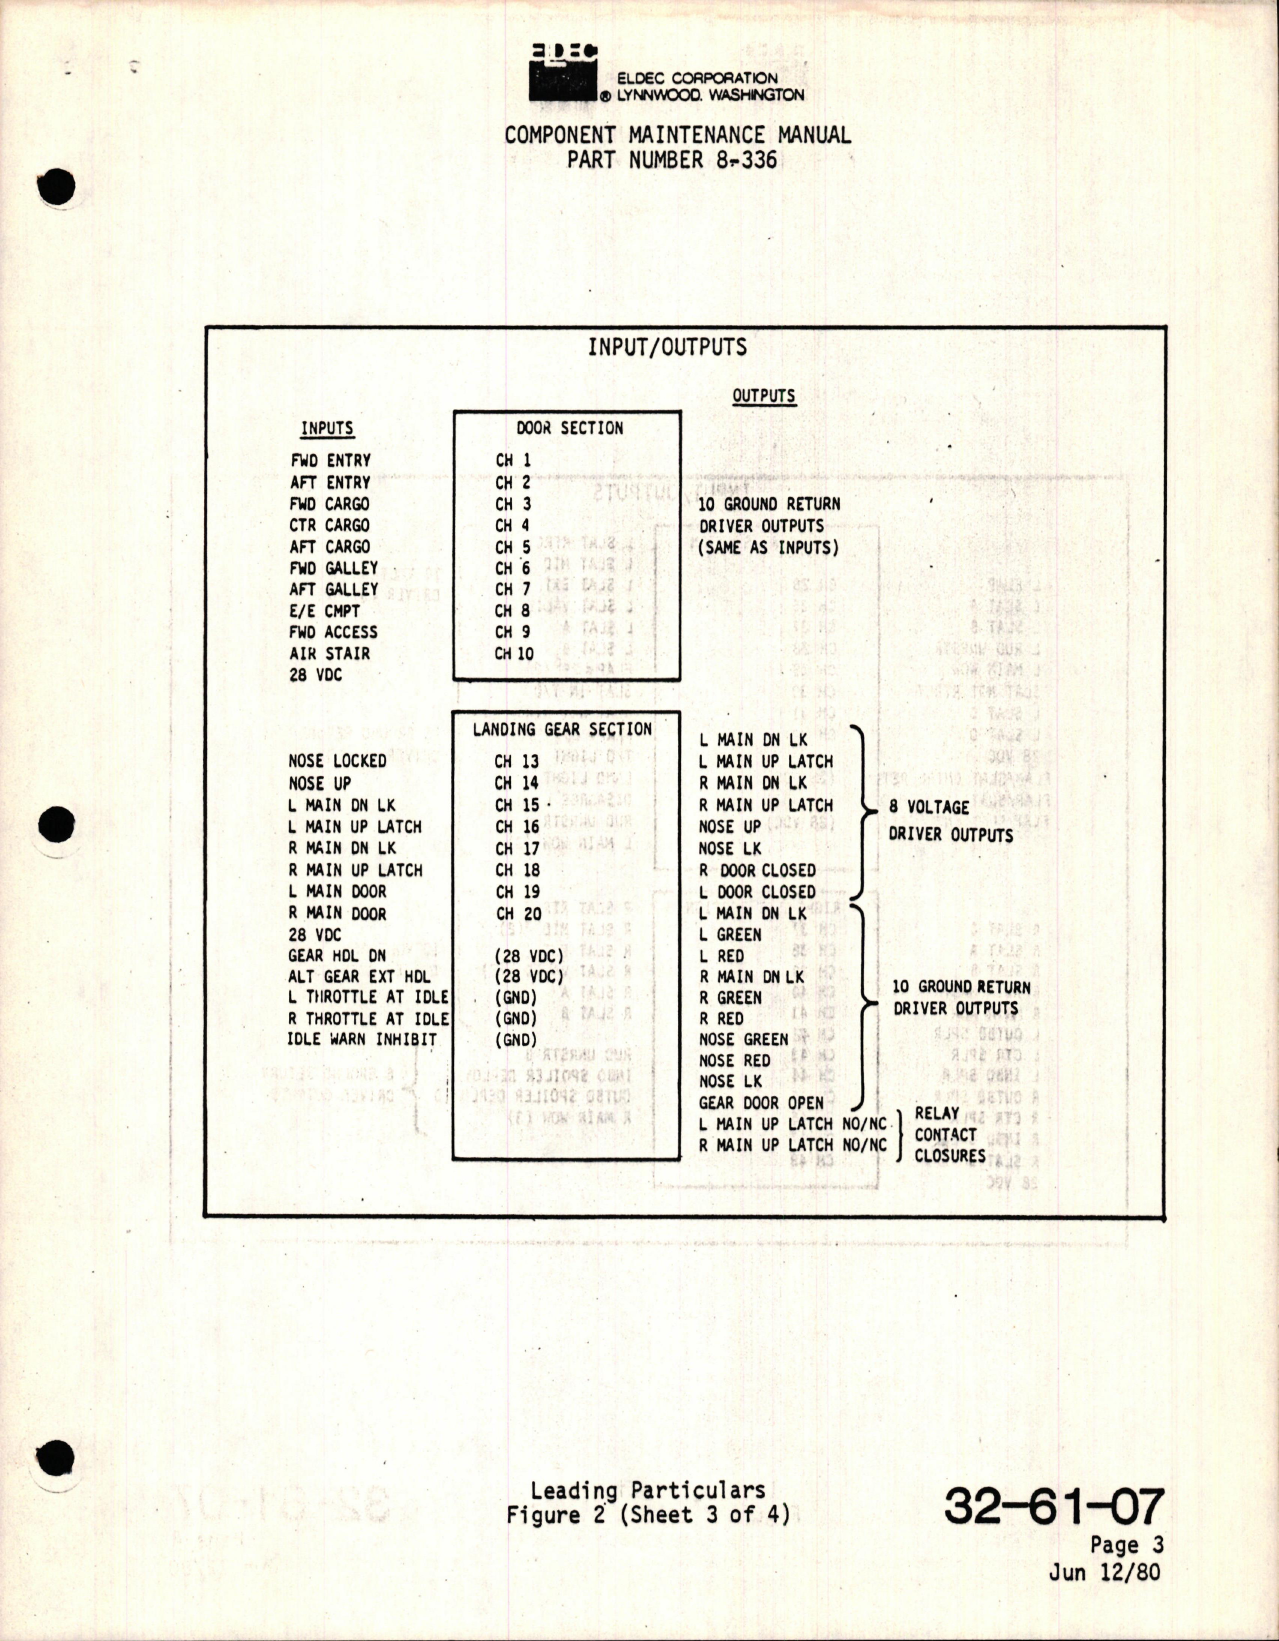 Sample page 9 from AirCorps Library document: Maintenance Manual with Illustrated Parts List for Proximity Switch Electronics Unit - Part 8-336-02